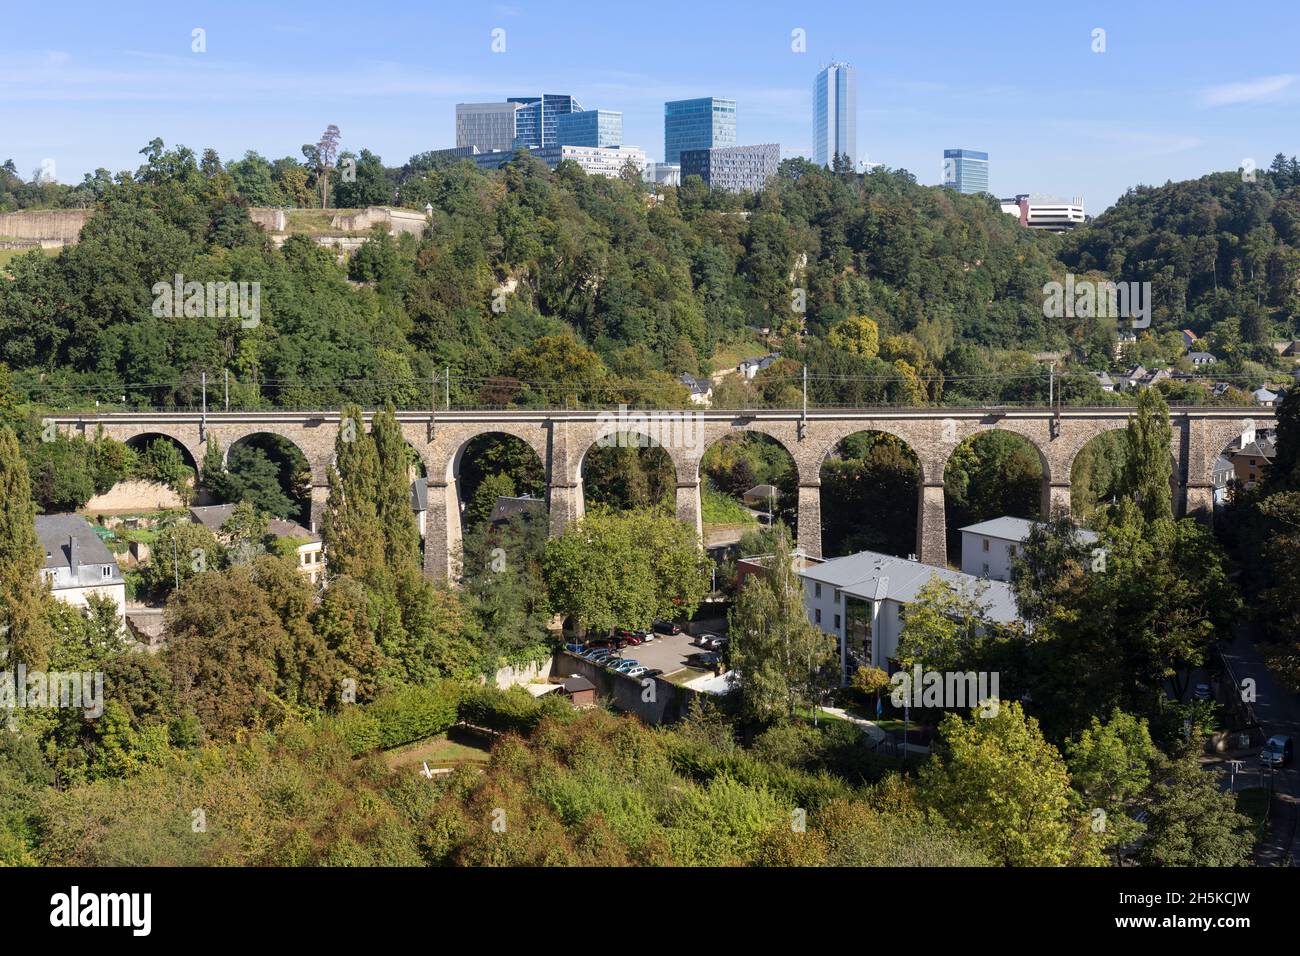 Europe, Luxembourg, Luxembourg City, Pafendall, Views of the Kirchberg with Viaduct carrying the Railway across the Alzette River Stock Photo